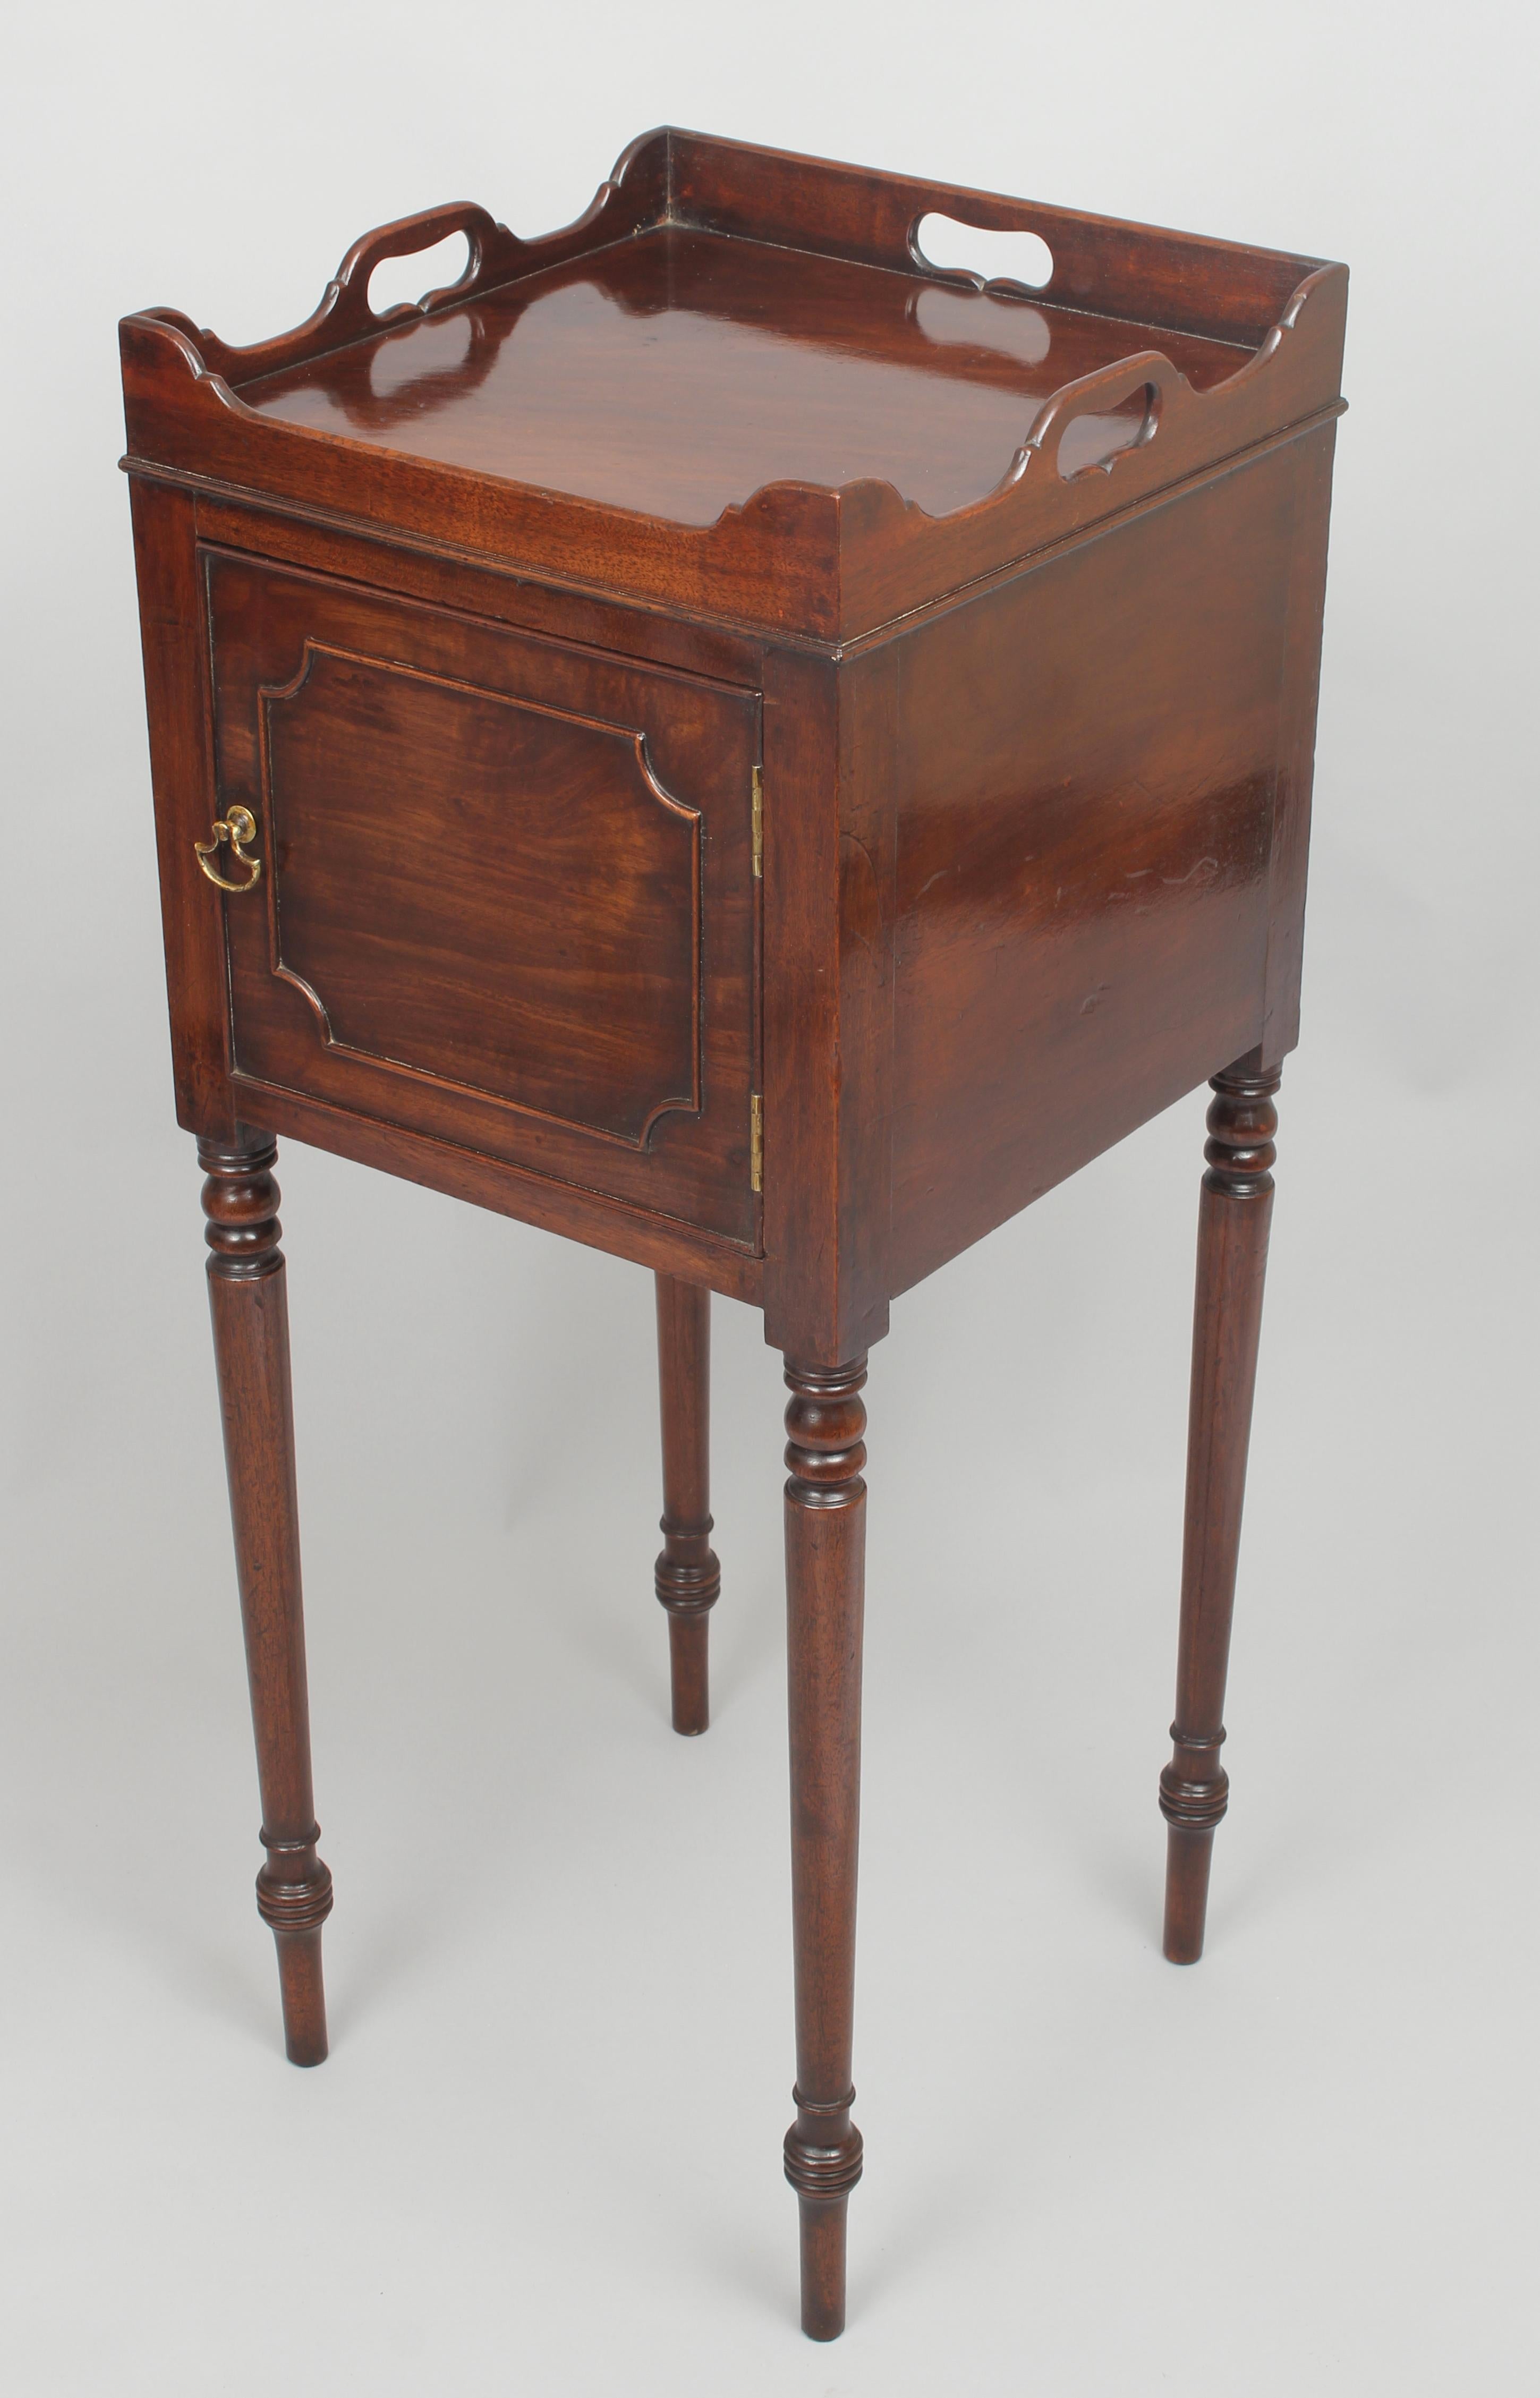 A very rare pair of George III period mahogany bedside pot-cupboards of rich-coloured timber; each with slatted bases, shaped three-part galleries and left and right hung doors with astragal-moulded panels, on slender turned legs.